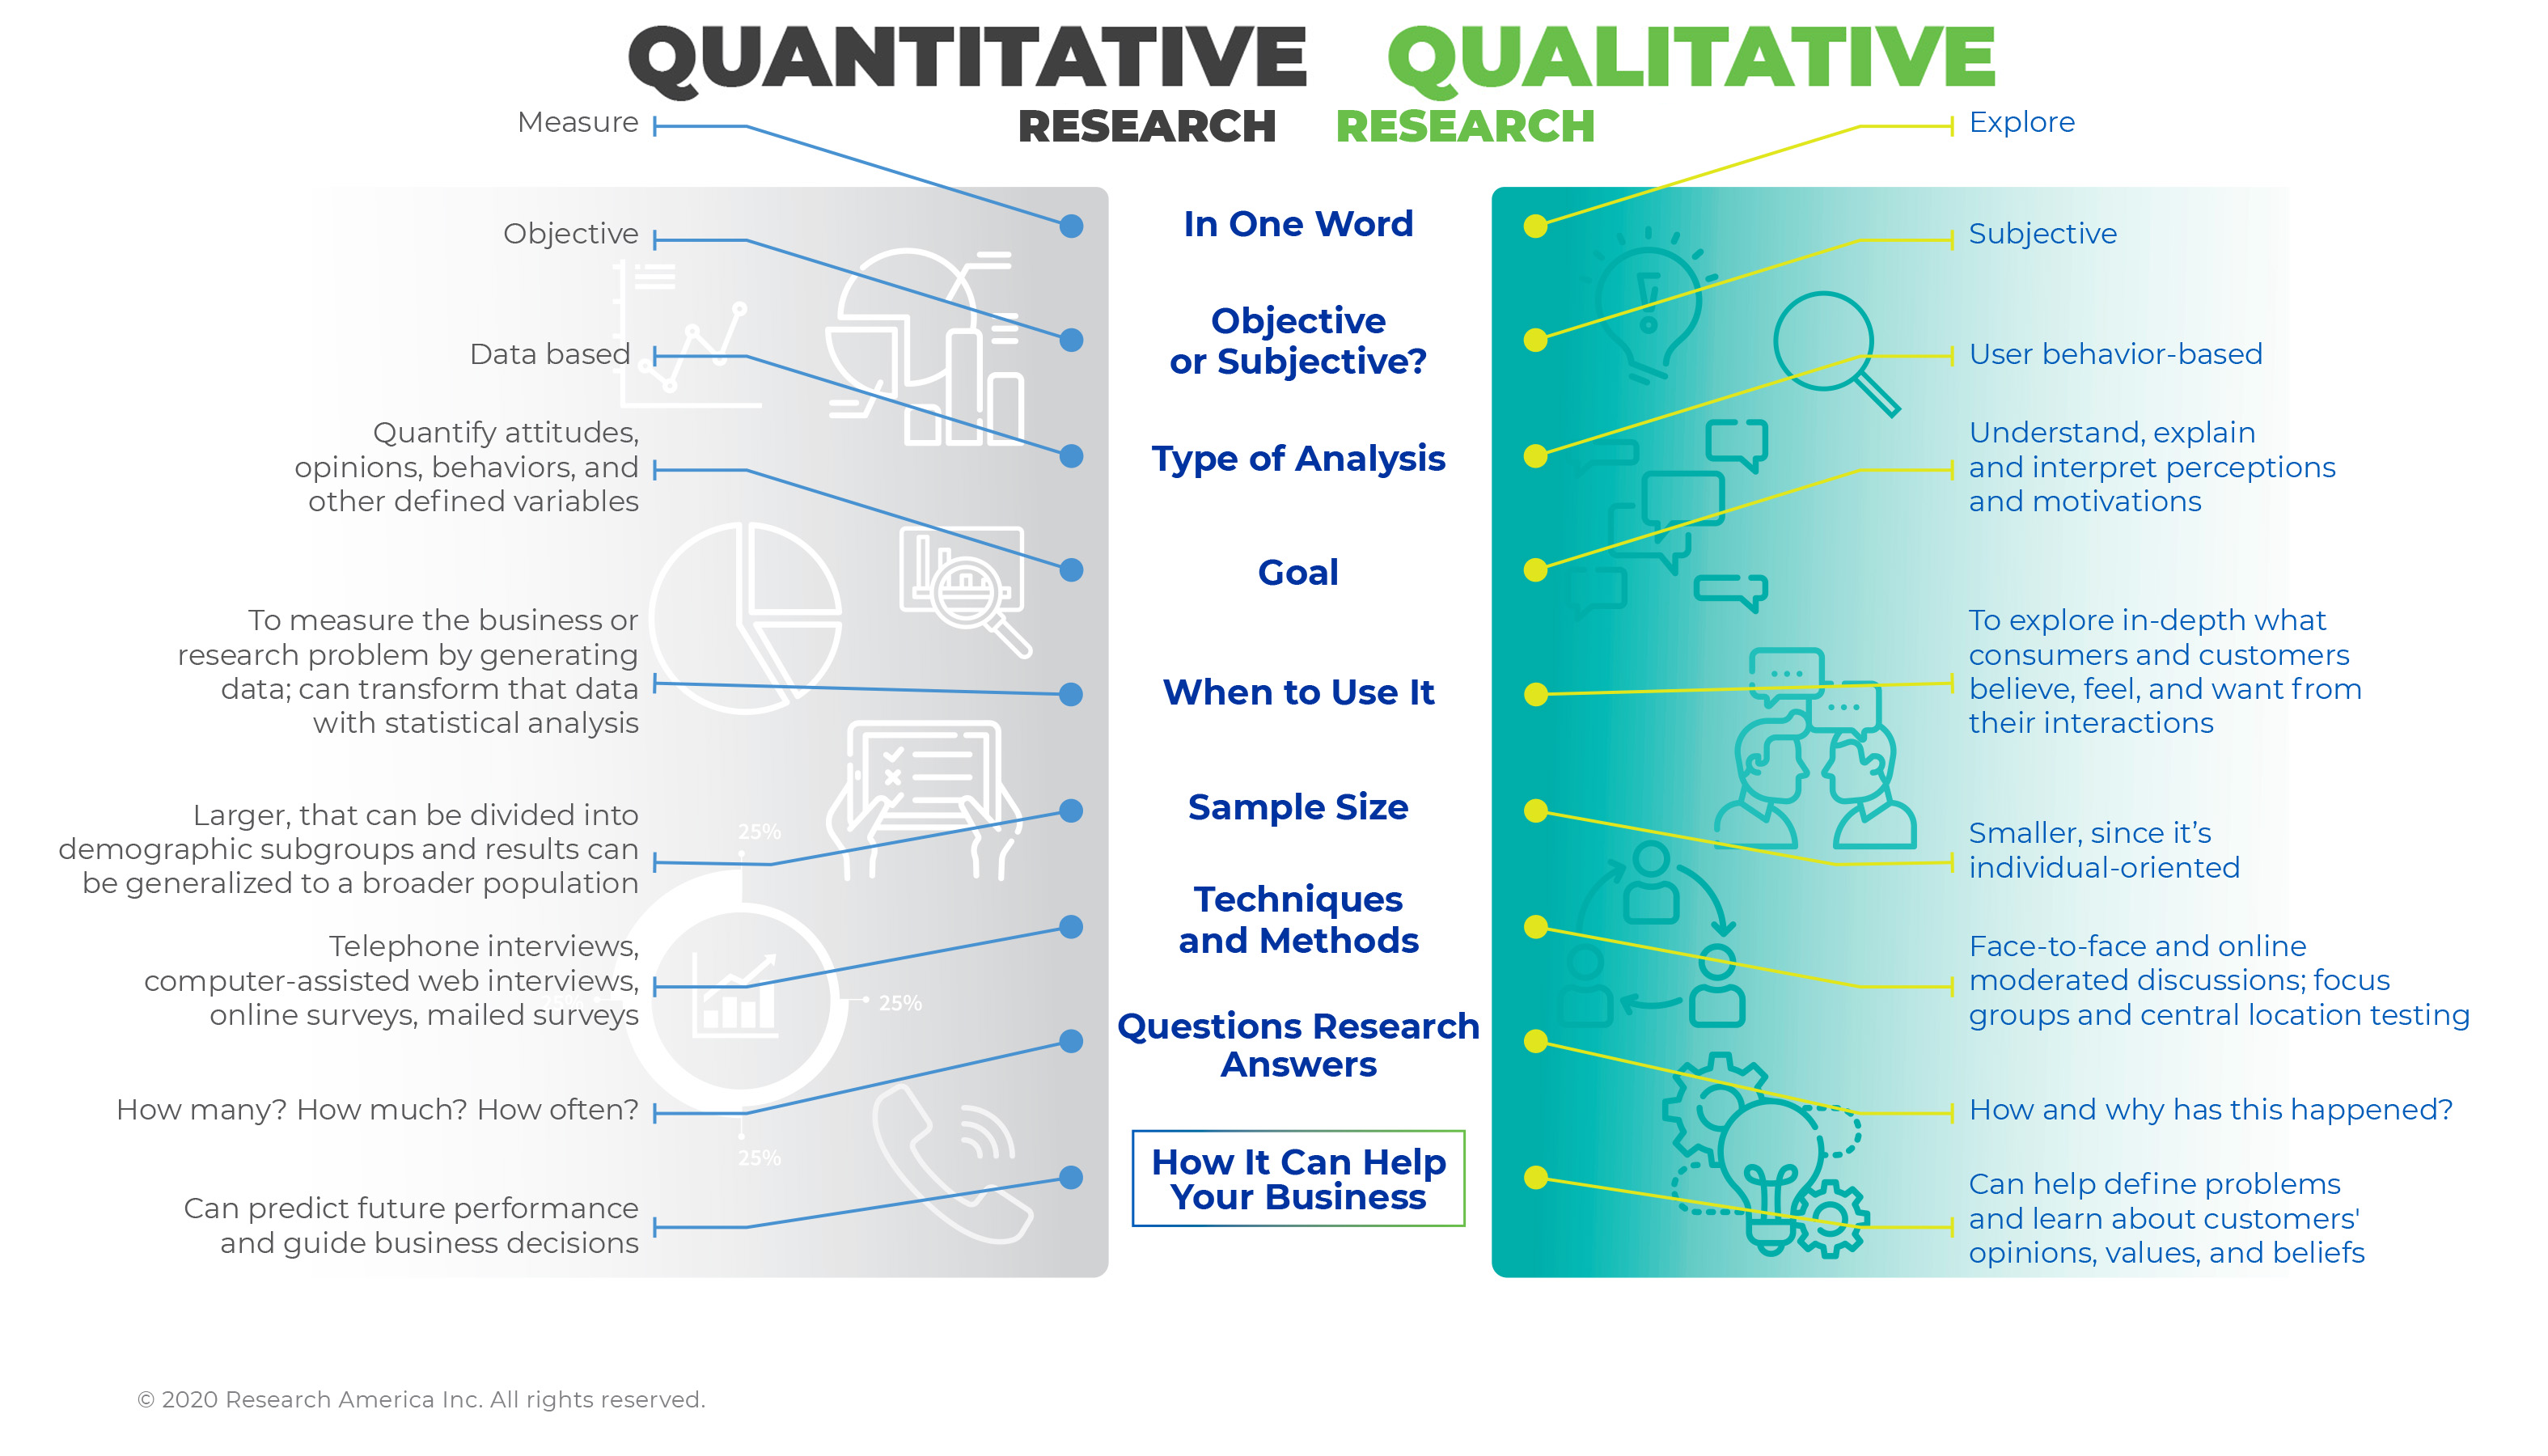 Difference between Quantitative and Qualitative Market Research